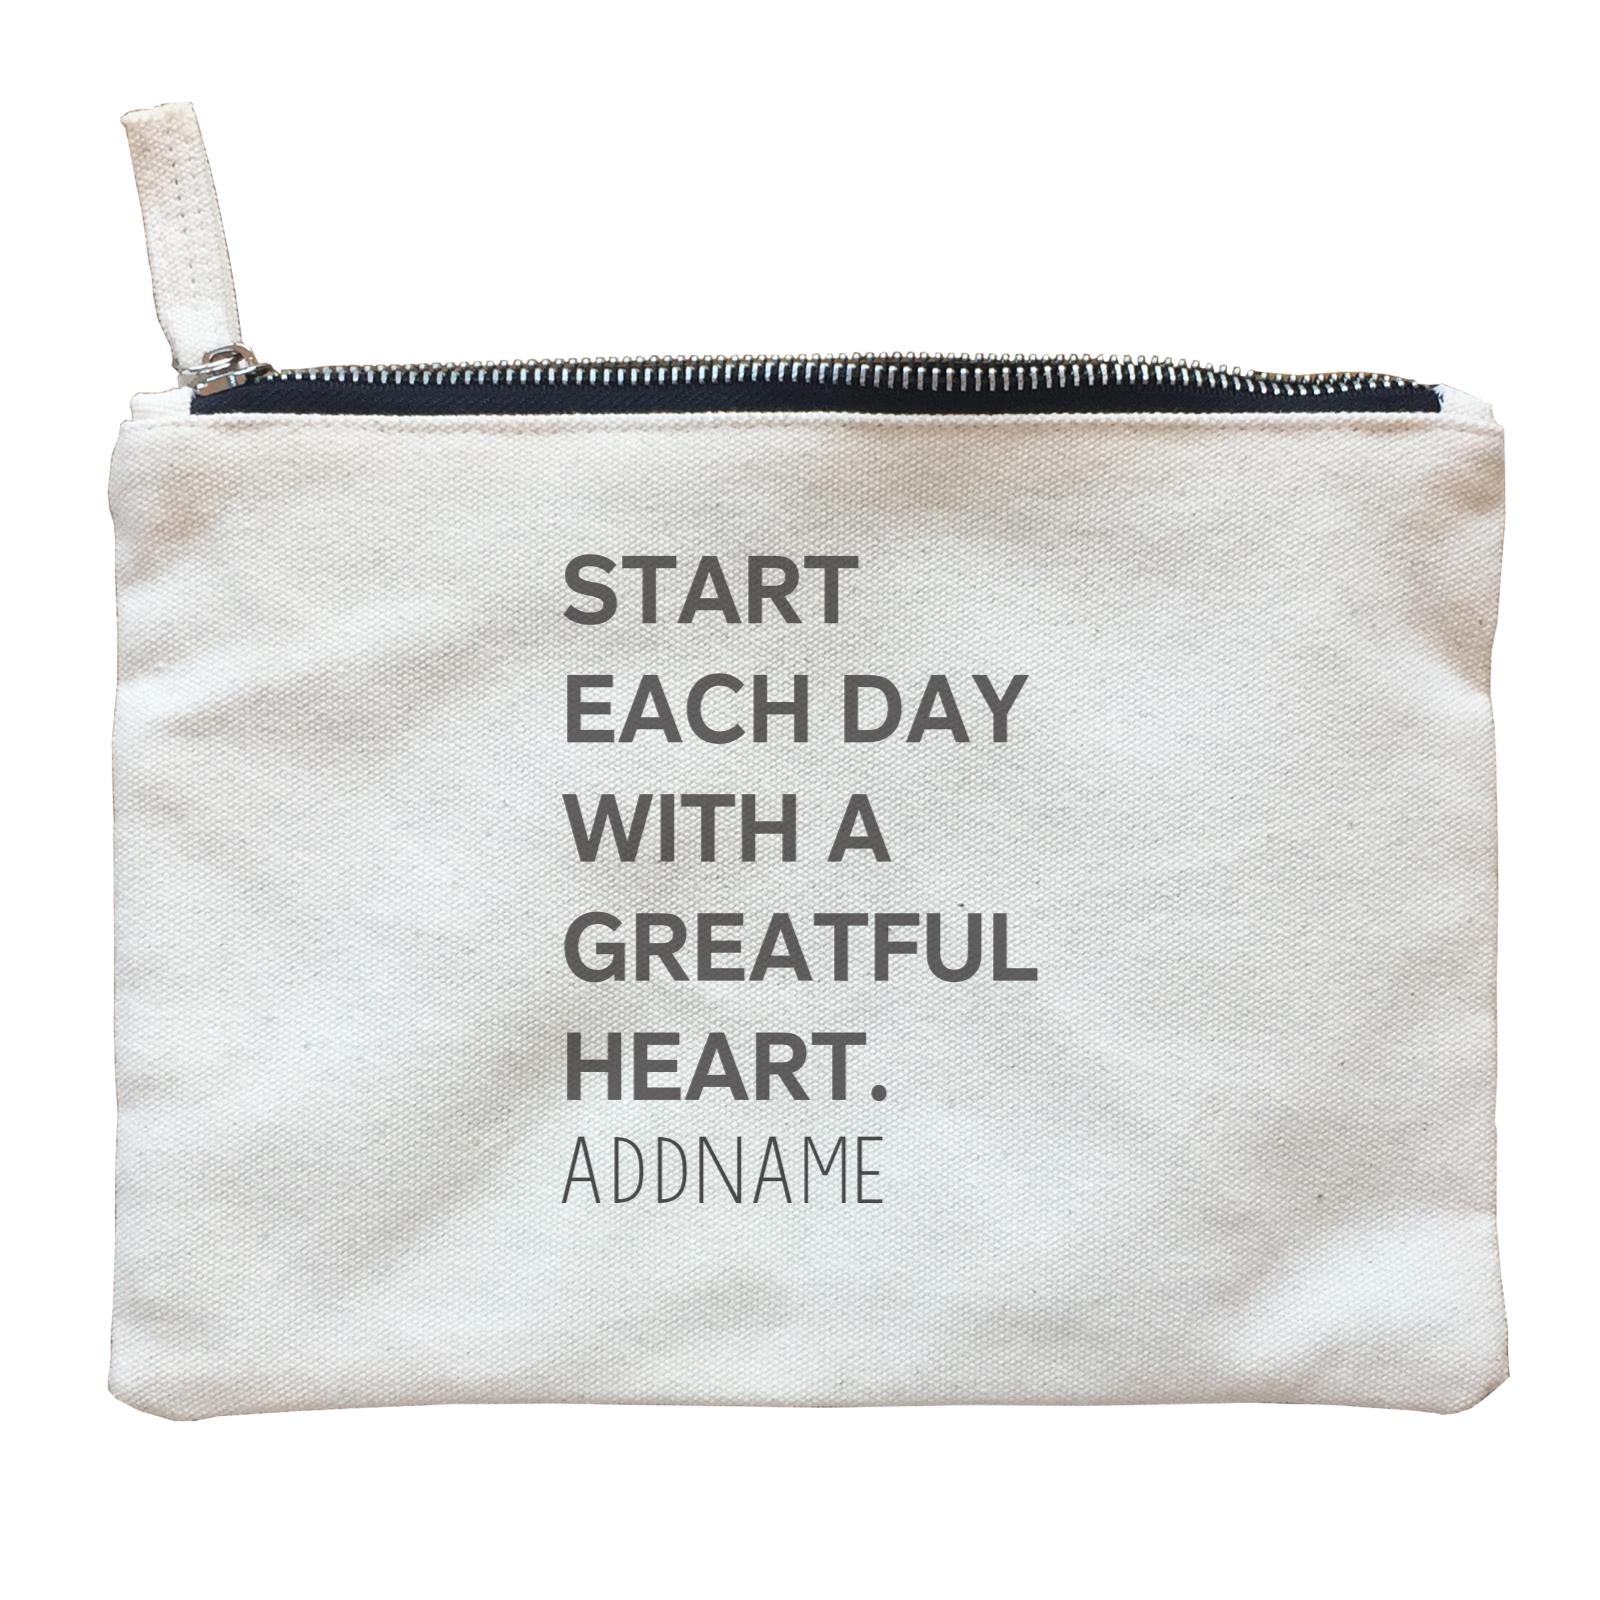 Inspiration Quotes Start Each Day With A Greatful Heart Addname Zipper Pouch